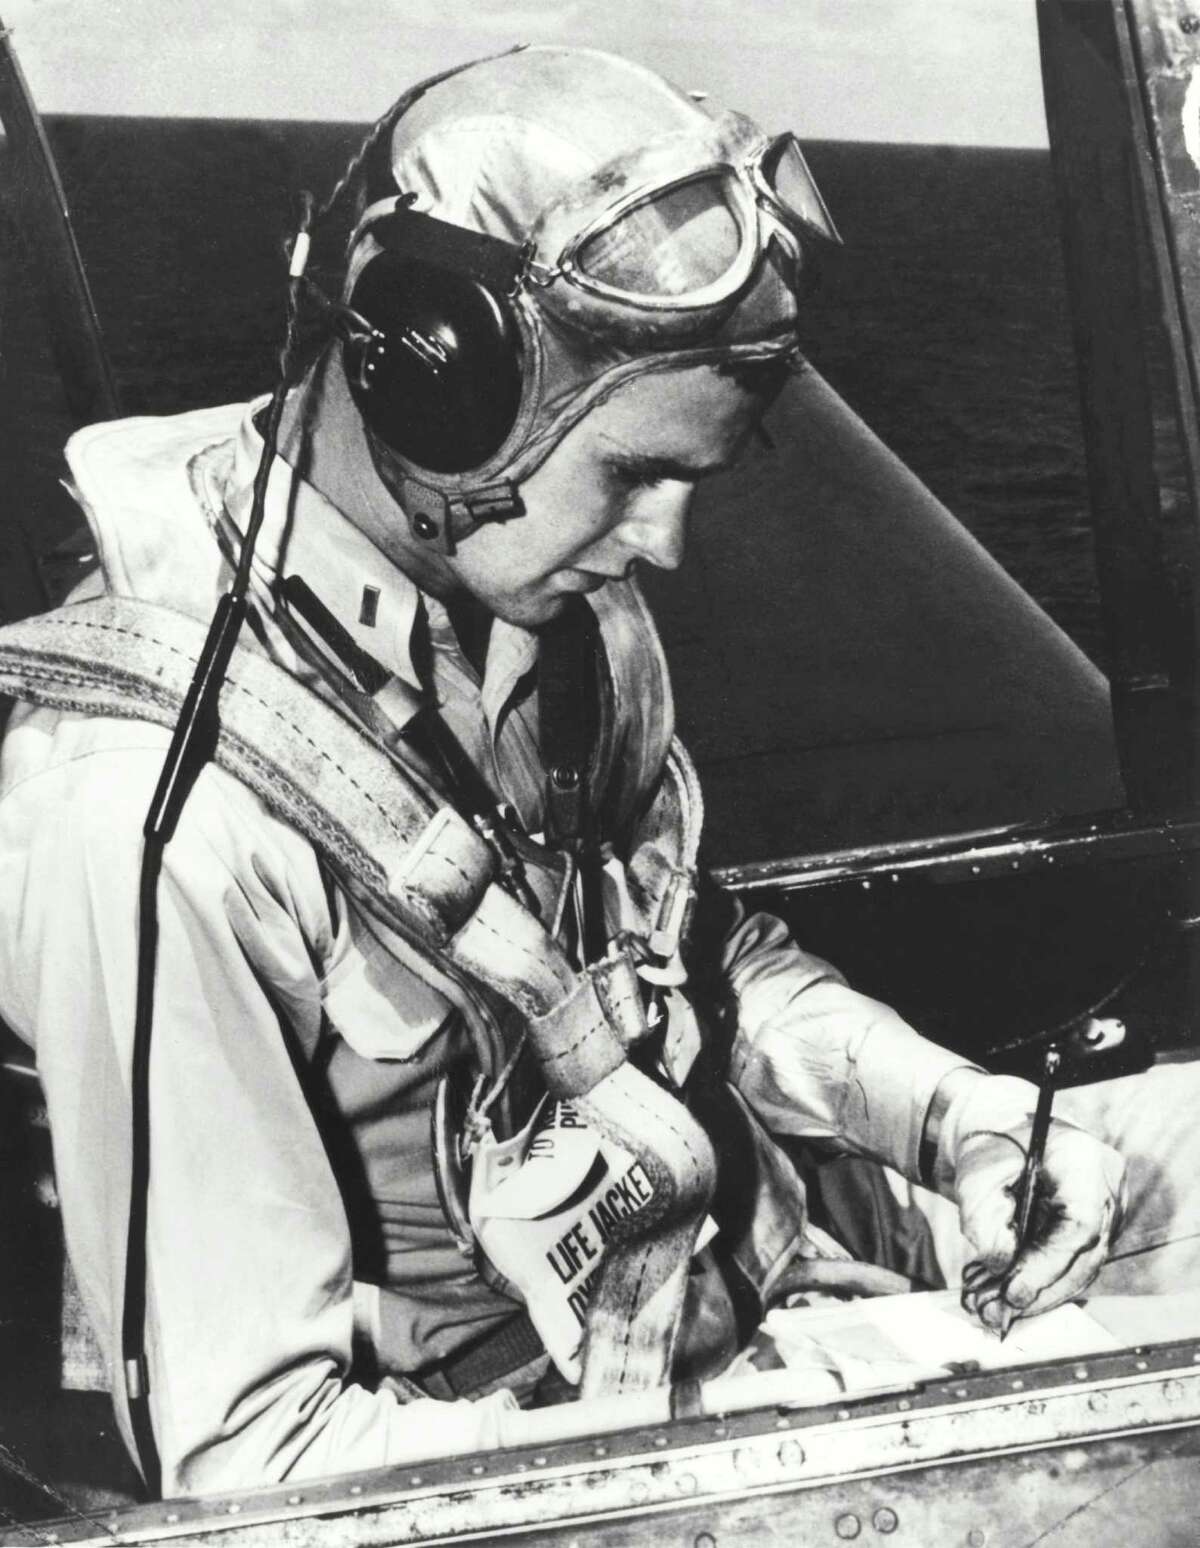 Perhaps the most famous member of the Connecticut Veterans Hall of Fame, Greenwich native and 41st U.S. President George Herbert Walker Bush is pictured in the cockpit of his TBM Avenger during the World War II. After his time as a Naval aviator, Bush graduated from Yale with a degree in economics in 1948, and served as a U.S. congressman for Texas, a UN ambassador, and a special envoy to China before being elected president in 1988.